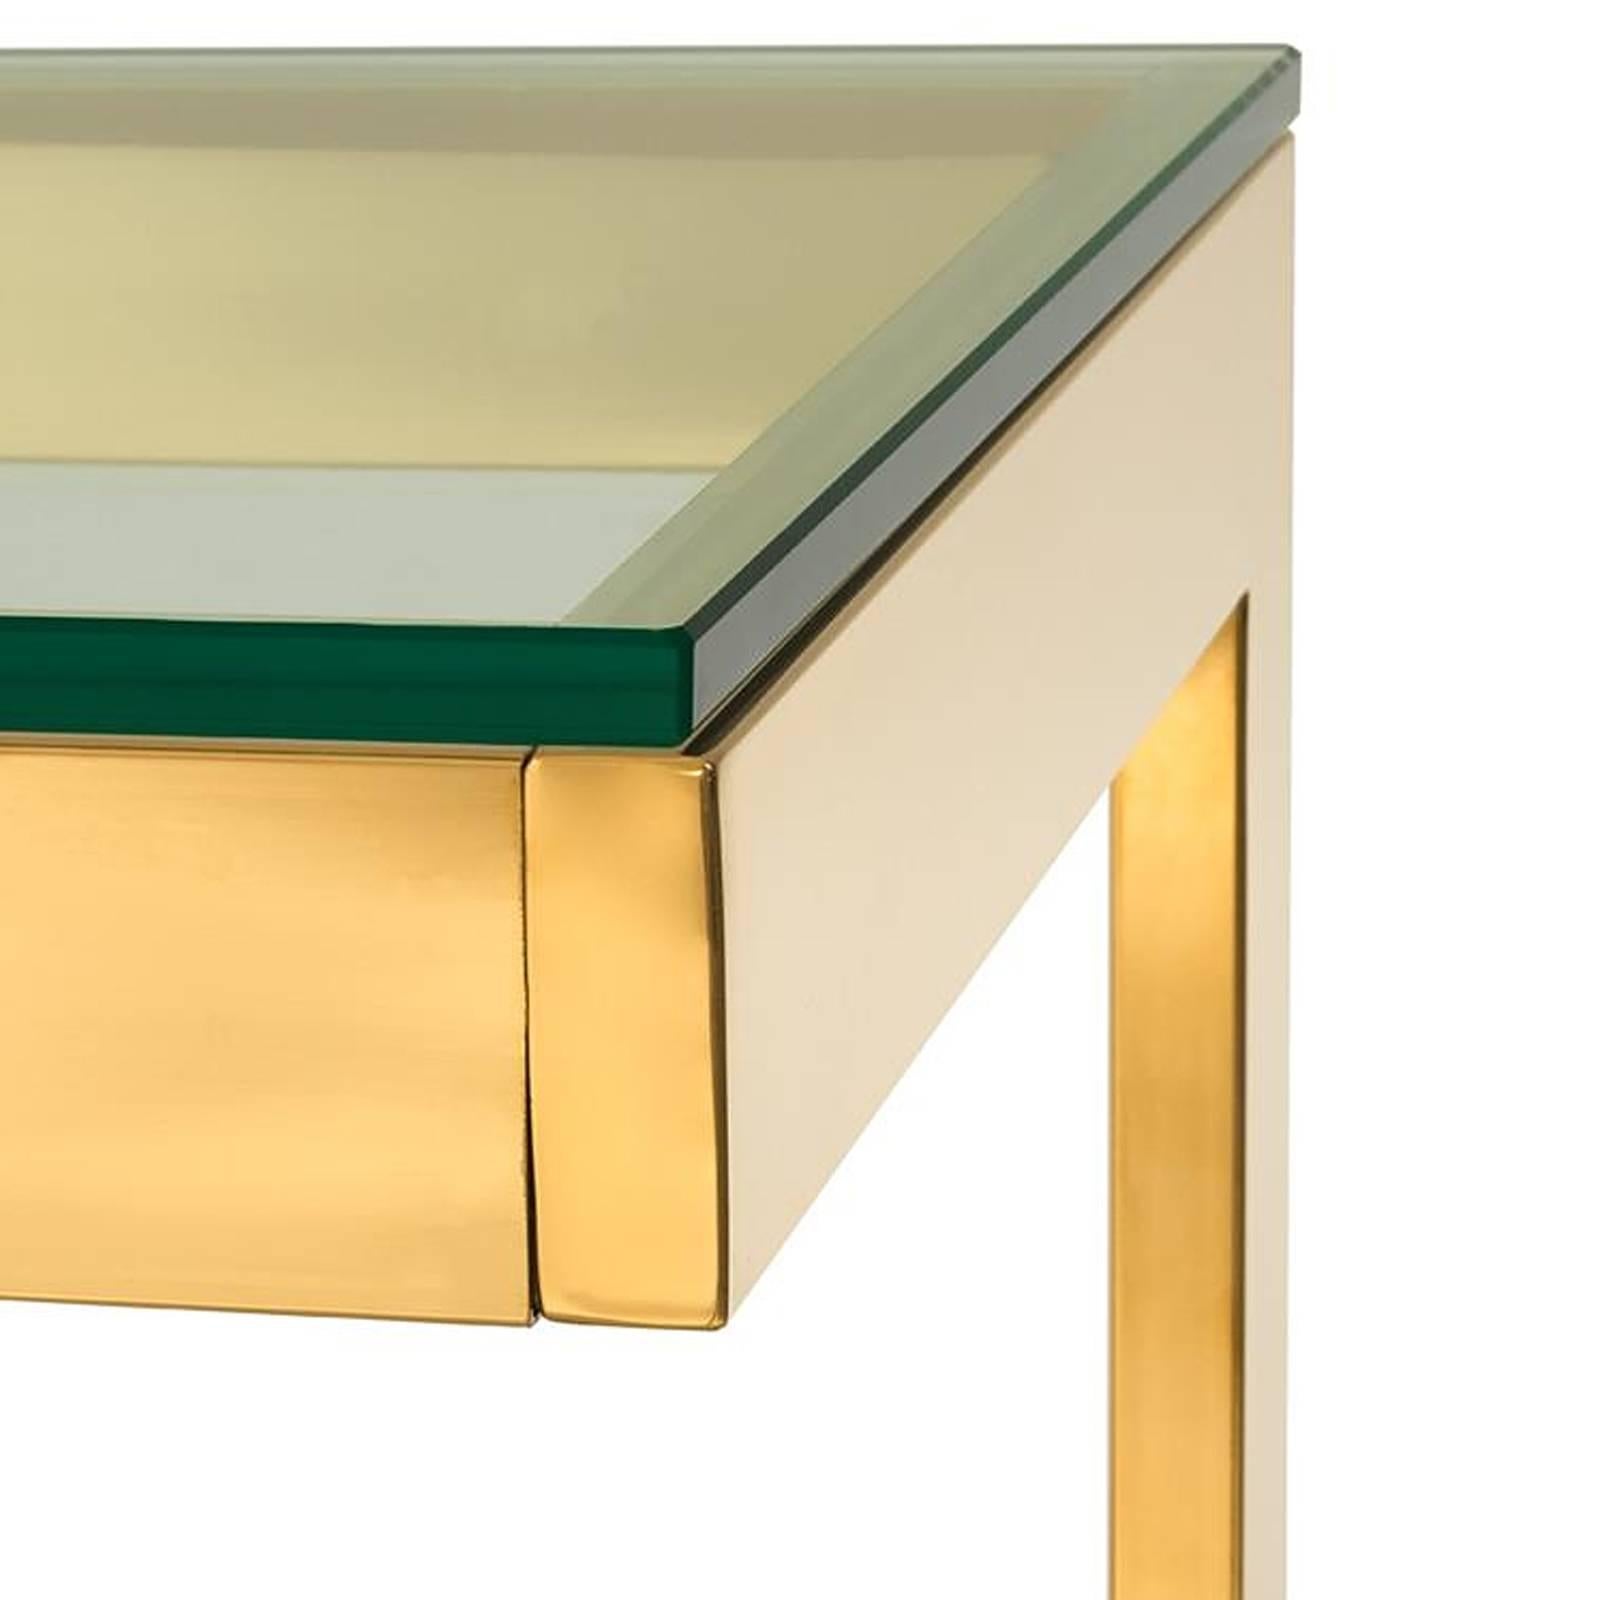 Side table double top with structure in gold
finish with 2 clear glass top.
Available with structure in bronze finish and 2
clear glass top.
Also available in coffee table and console table double top.
